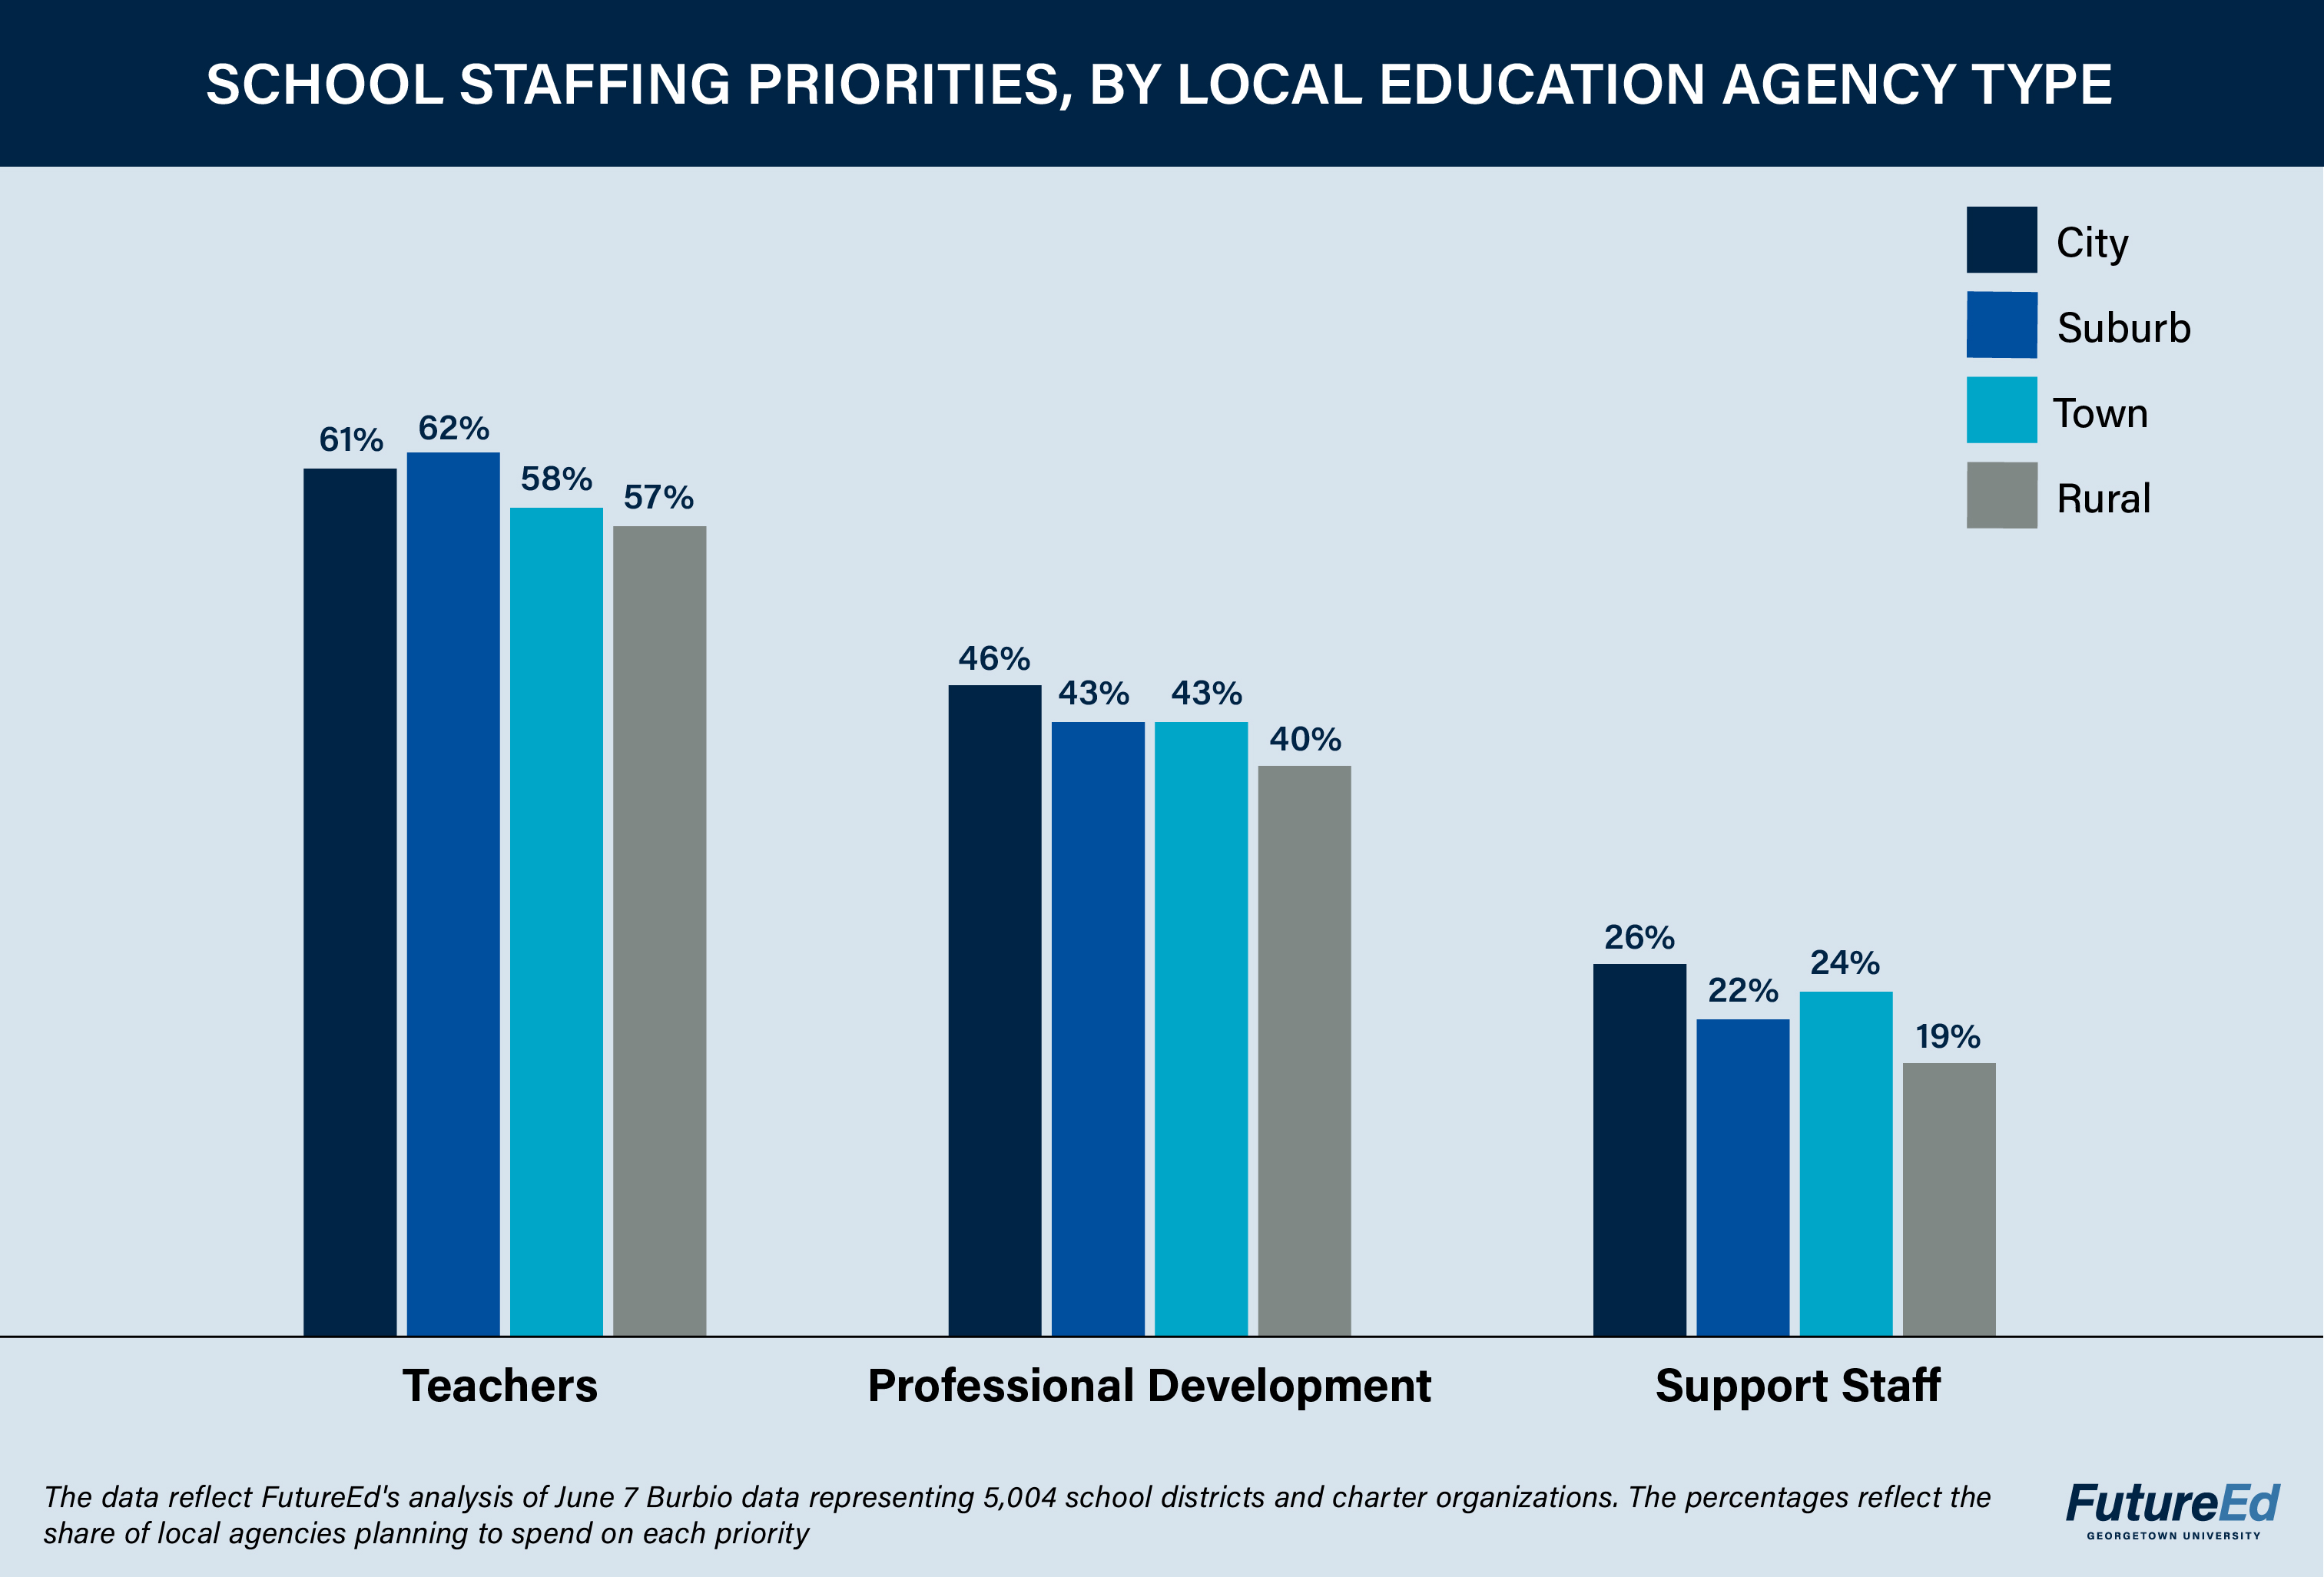 Chart: School Staffing Priorities, by Local Education Agency Type. Teachers: city 61%, suburb 62%, town 58%, rural 57%. Professional development: city 46%, suburb 43%, town 43%, rural 40%. Support staff: city 26%, suburb 22%, town 24%, rural 19%. (The data reflect FutureEd's analysis of June 7 Burbio data representing 5,004 school districts and charter organizations. The percentages reflect the share of local agencies planning to spend on each priority.)